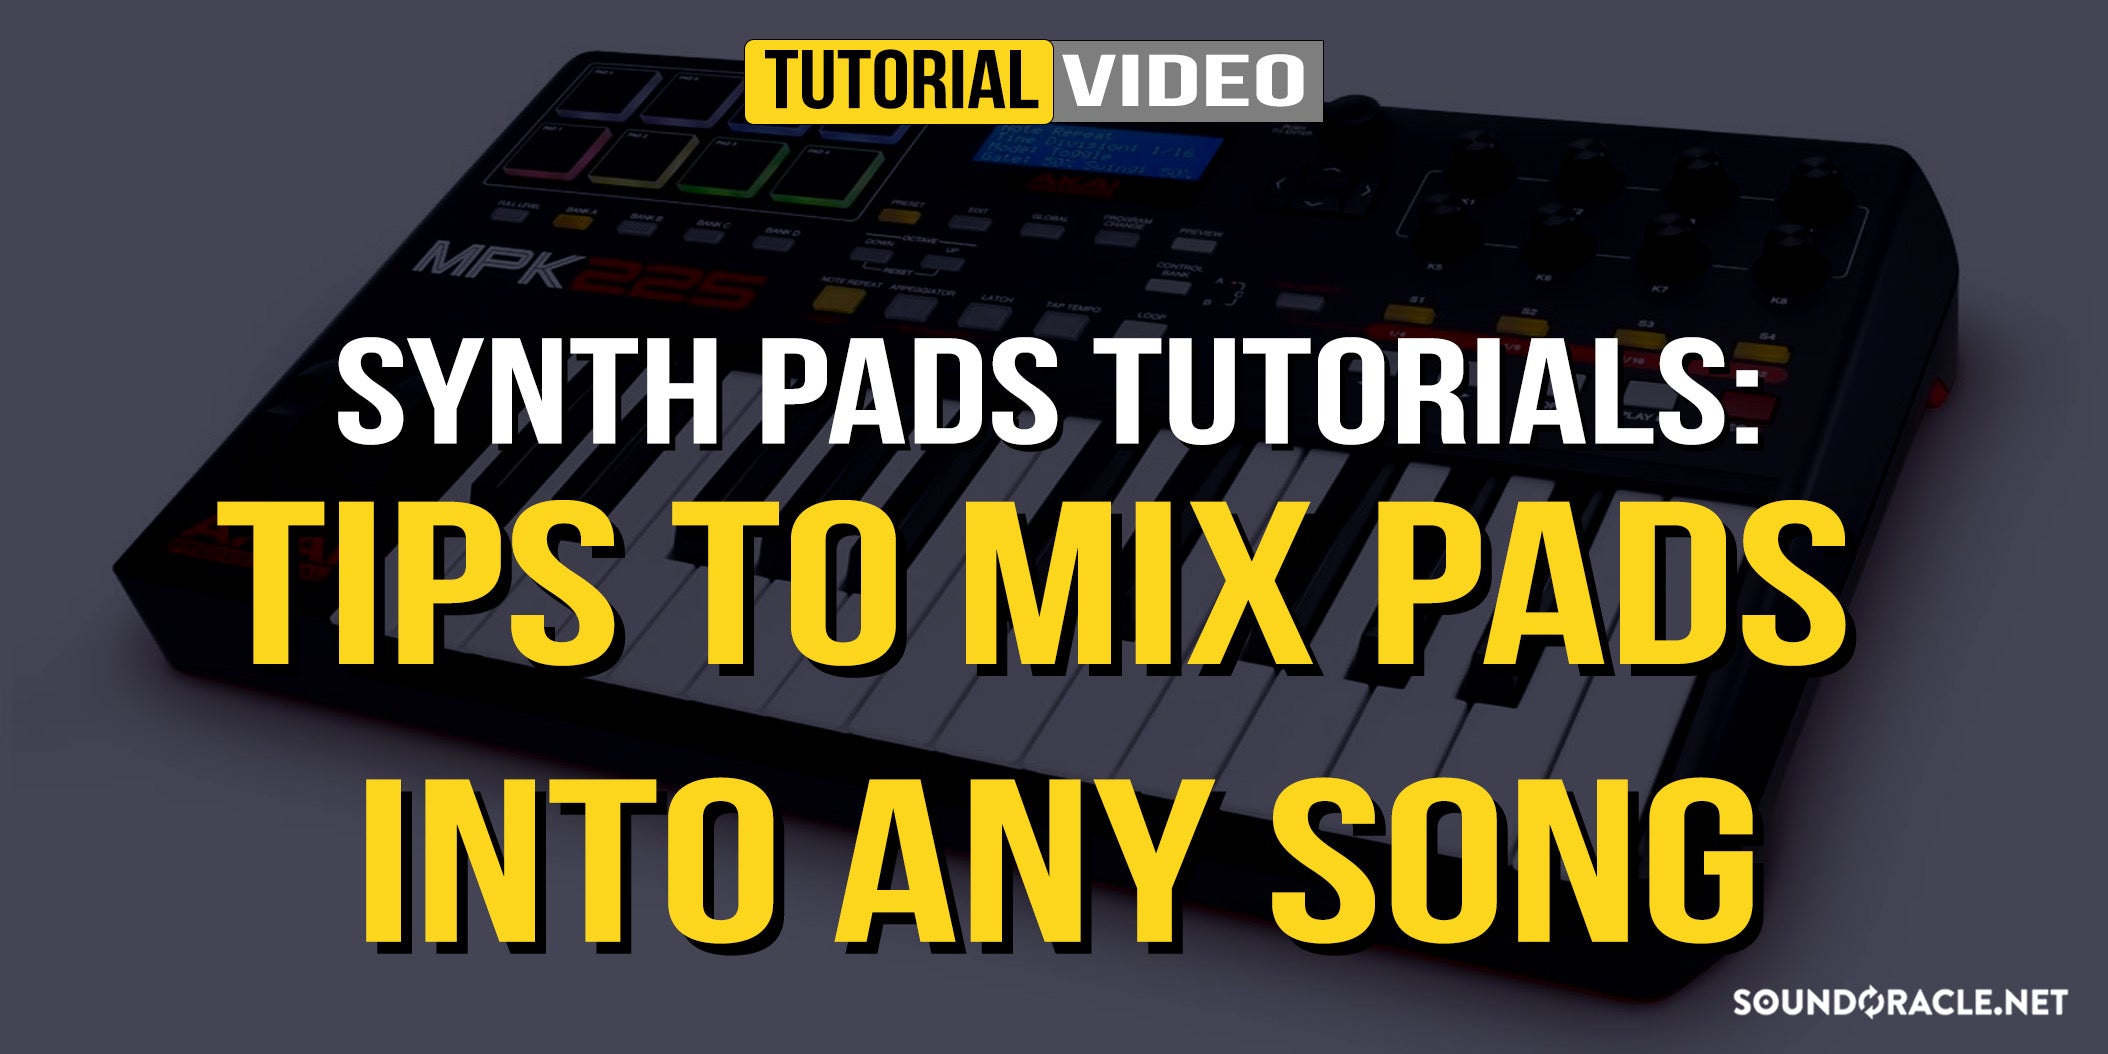 Synth Pads Tutorials: Tips To Mix Pads Into Any Song